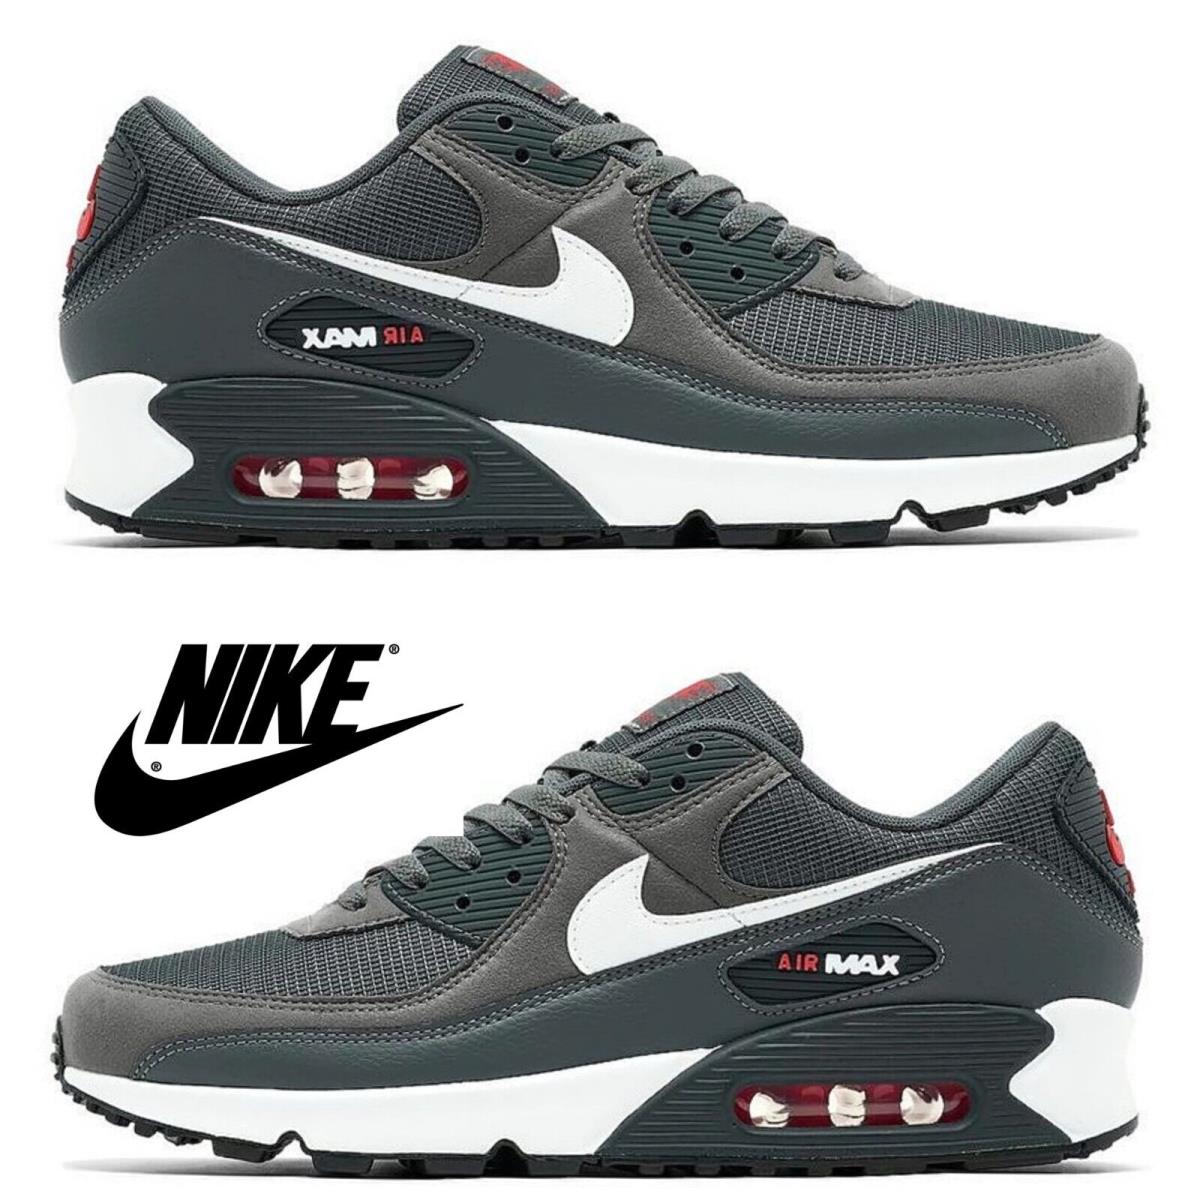 Nike Air Max 90 Casual Men`s Sneakers Running Athletic Sport Comfort Shoes Grey - Gray, Maufacturer: Iron Grey/White/University Red